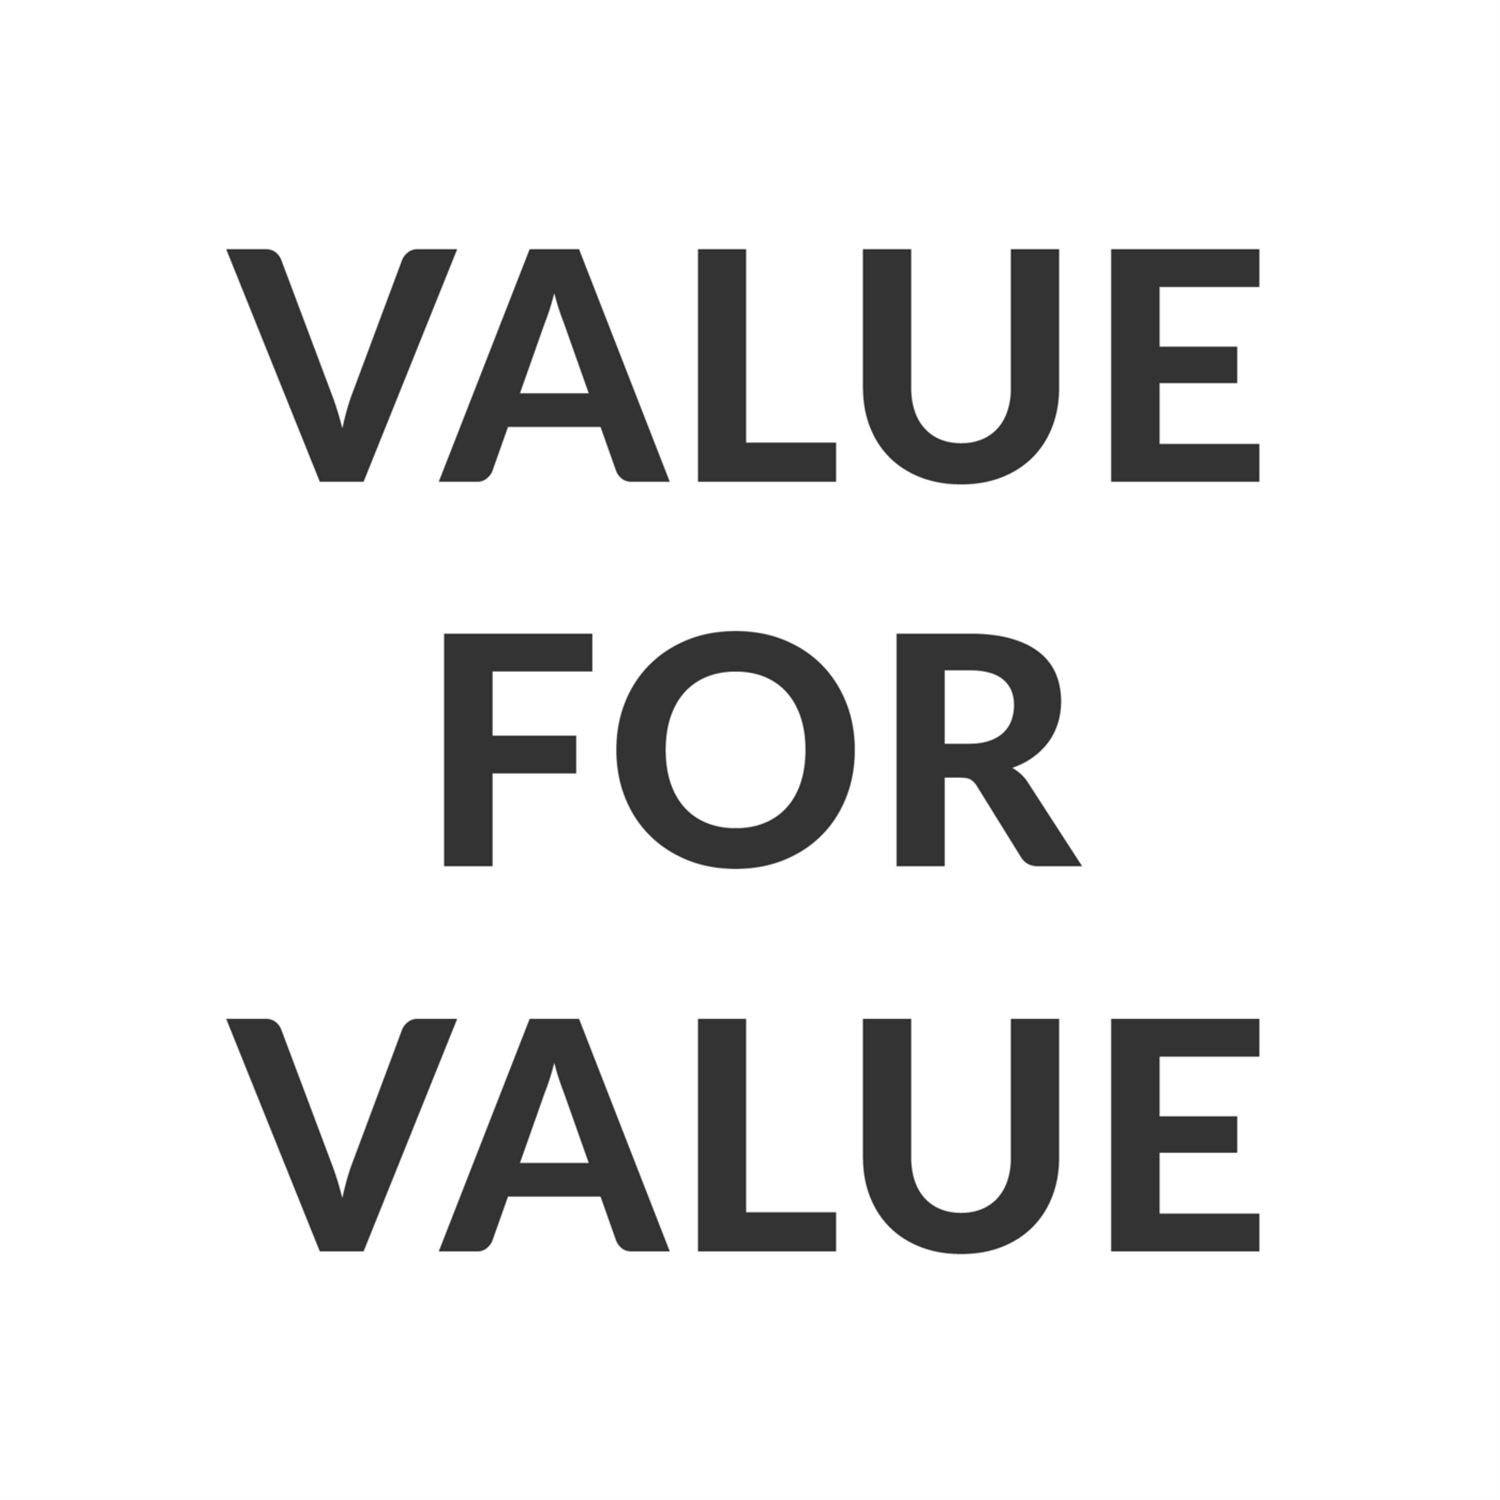 Focus in on Value For Value